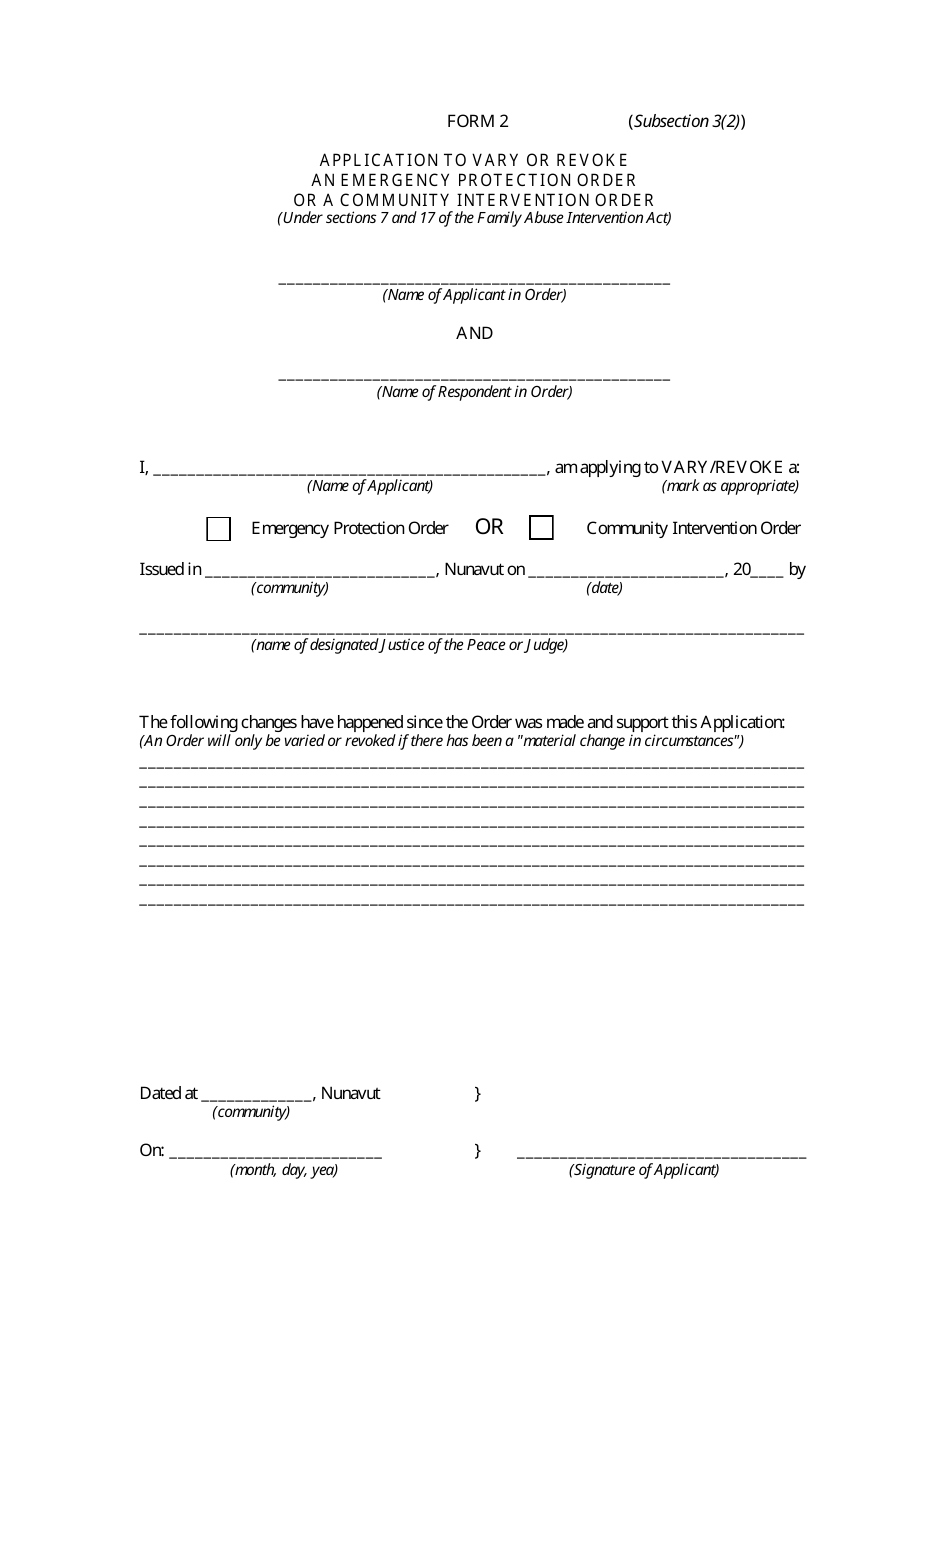 Form 2 Application to Vary or Revoke an Emergency Protection Order or a Community Intervention Order - Nunavut, Canada, Page 1